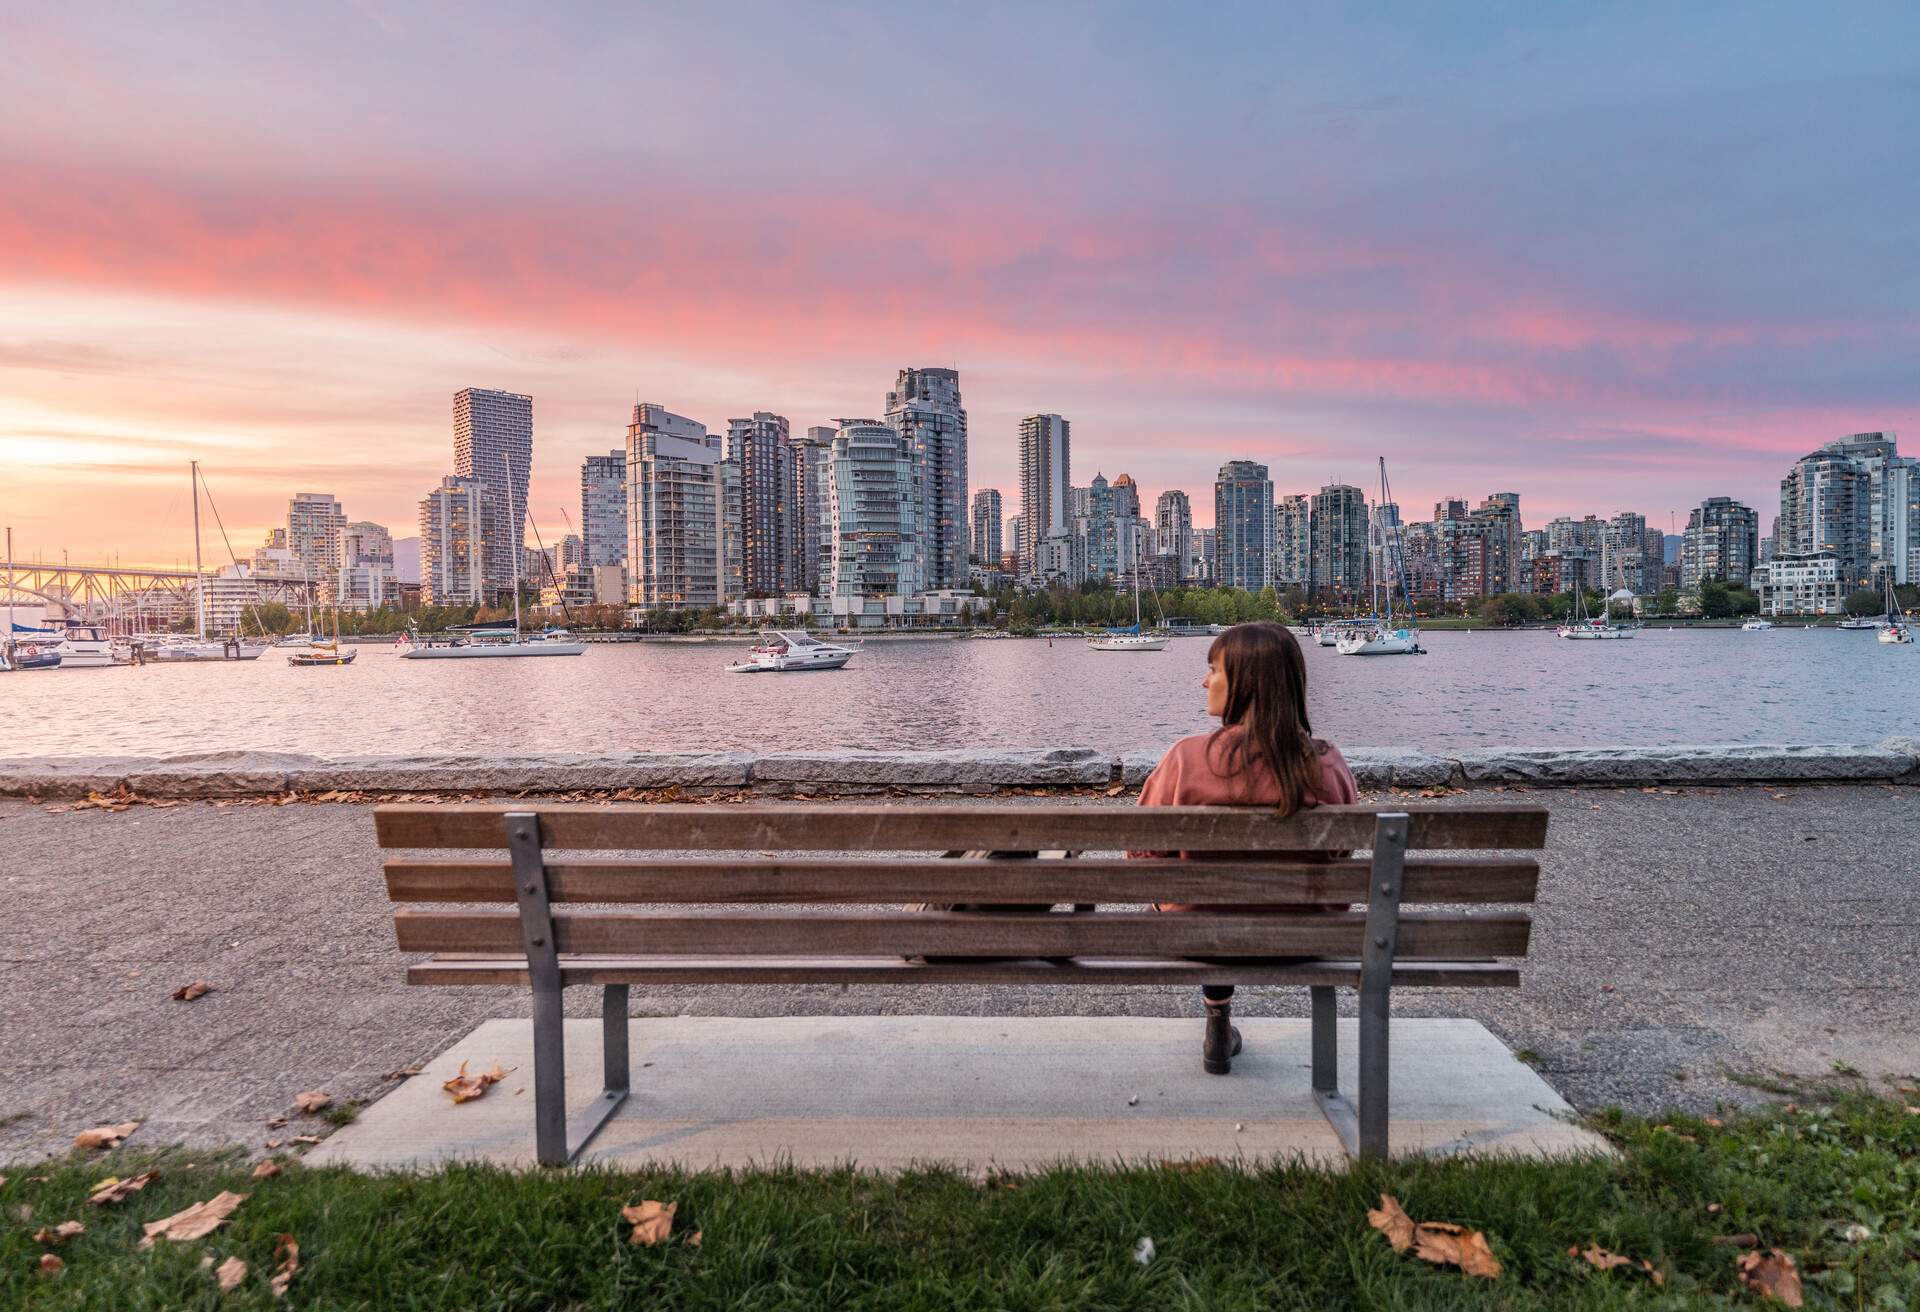 Panoramic Vancouver skyline at sunset from from the Island Park Walk. British Columbia, Canada. Woman sitting on a bench looking left